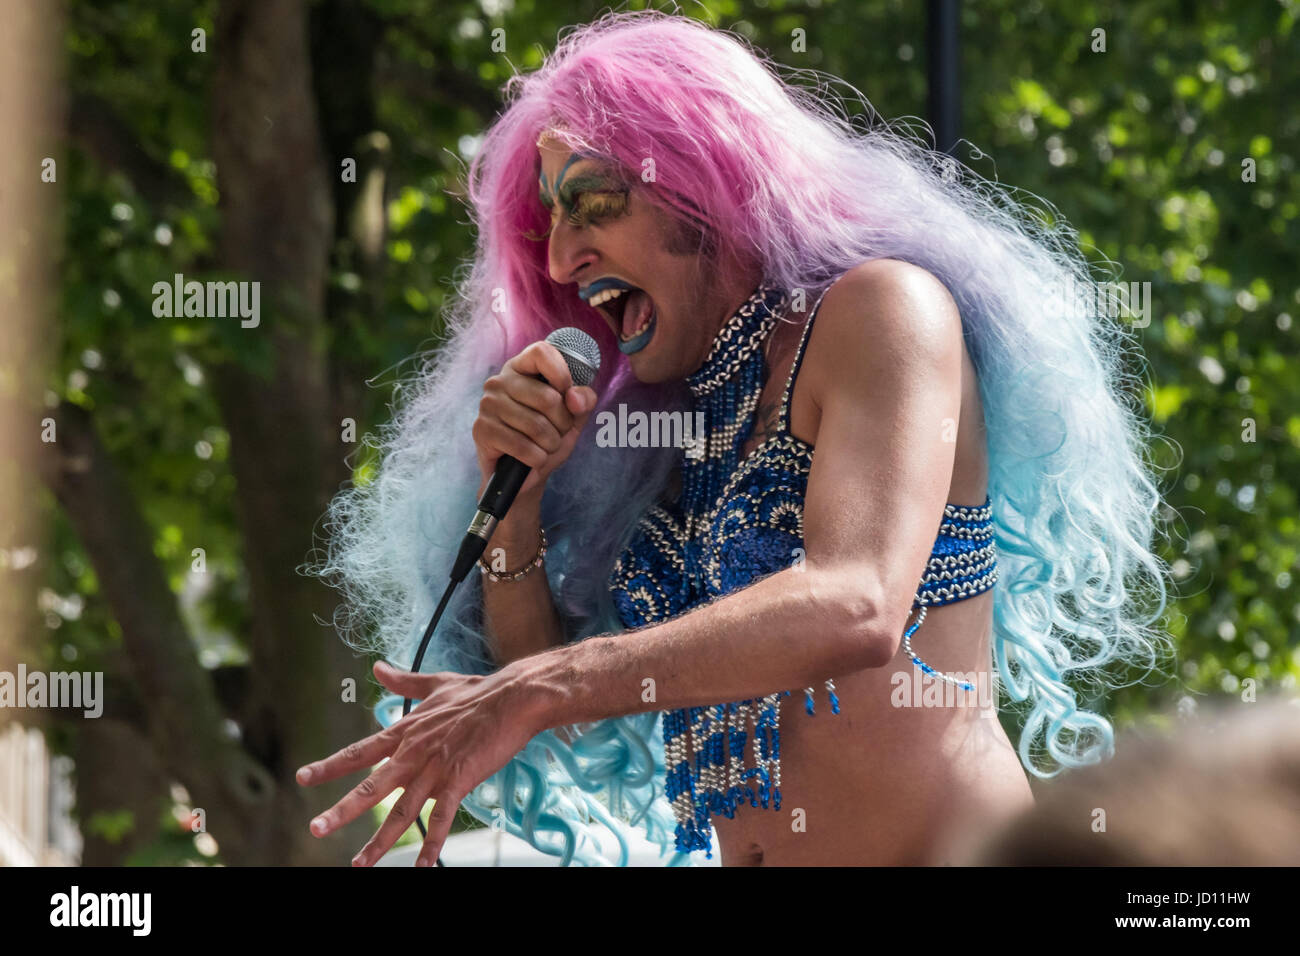 June 17, 2017 - London, UK - London, UK. 17th June, 2017. A gay cabaret performer in drag sings at the protest at Downing St calling on Theresa May to resign.THe DUP whose support she needs to get a majority are a party intrinsically linked with Protestant terrorist groups and dominated by a homophobic church which represents a tiny minority of the Northern Irish population, Northern Irish women campaigning for abortion and other women's rights, DPAC who spoke about the Tory assault on the disabled and others. Peter Marshall Images Live (Credit Image: © Peter Marshall/ImagesLive via ZUMA Wire Stock Photo